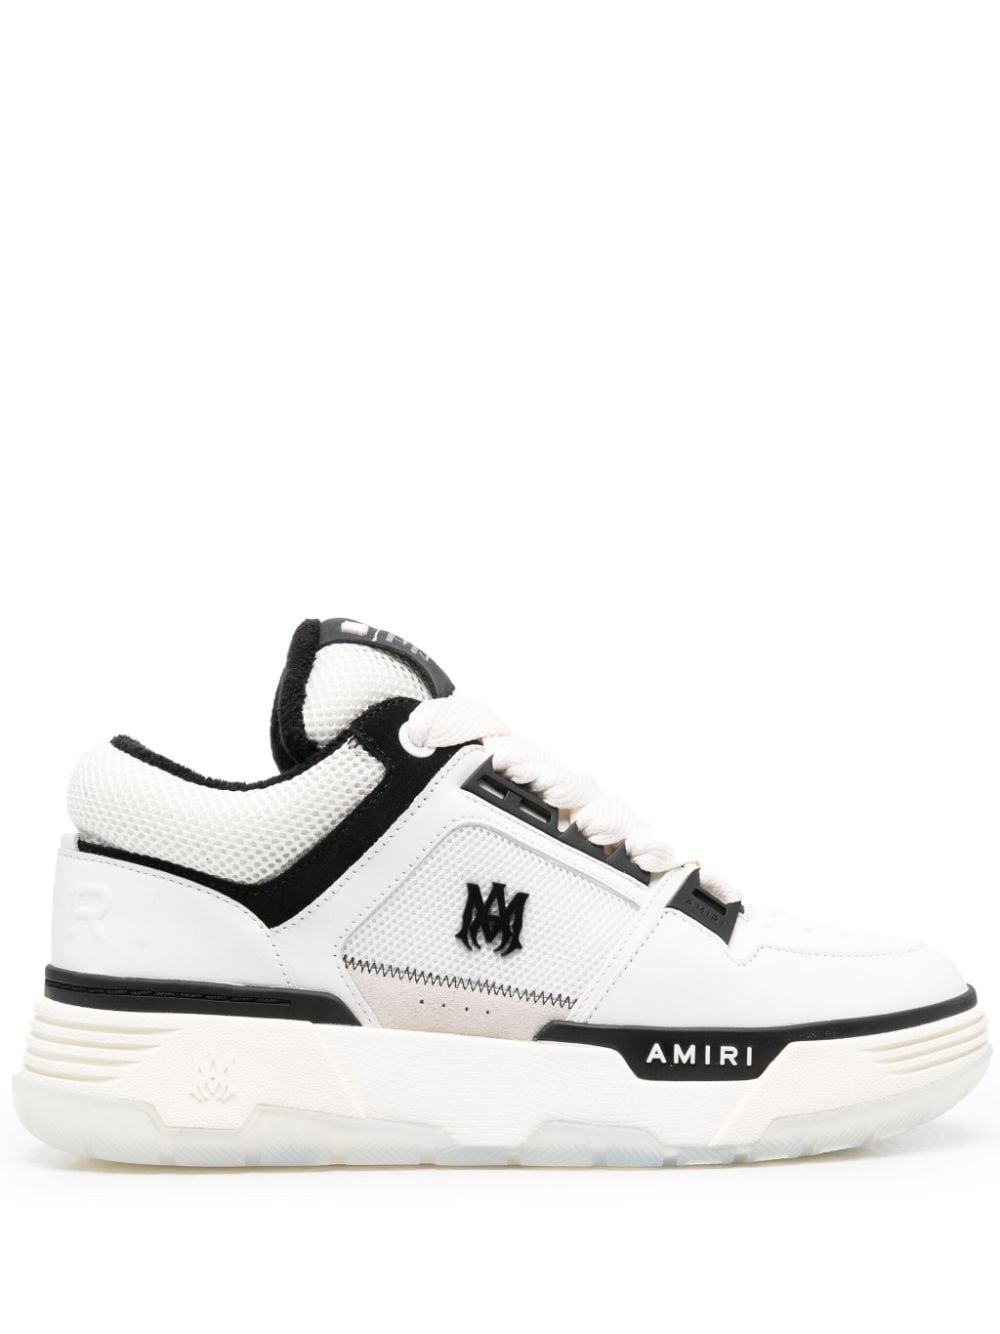 MA-1 leather sneakers